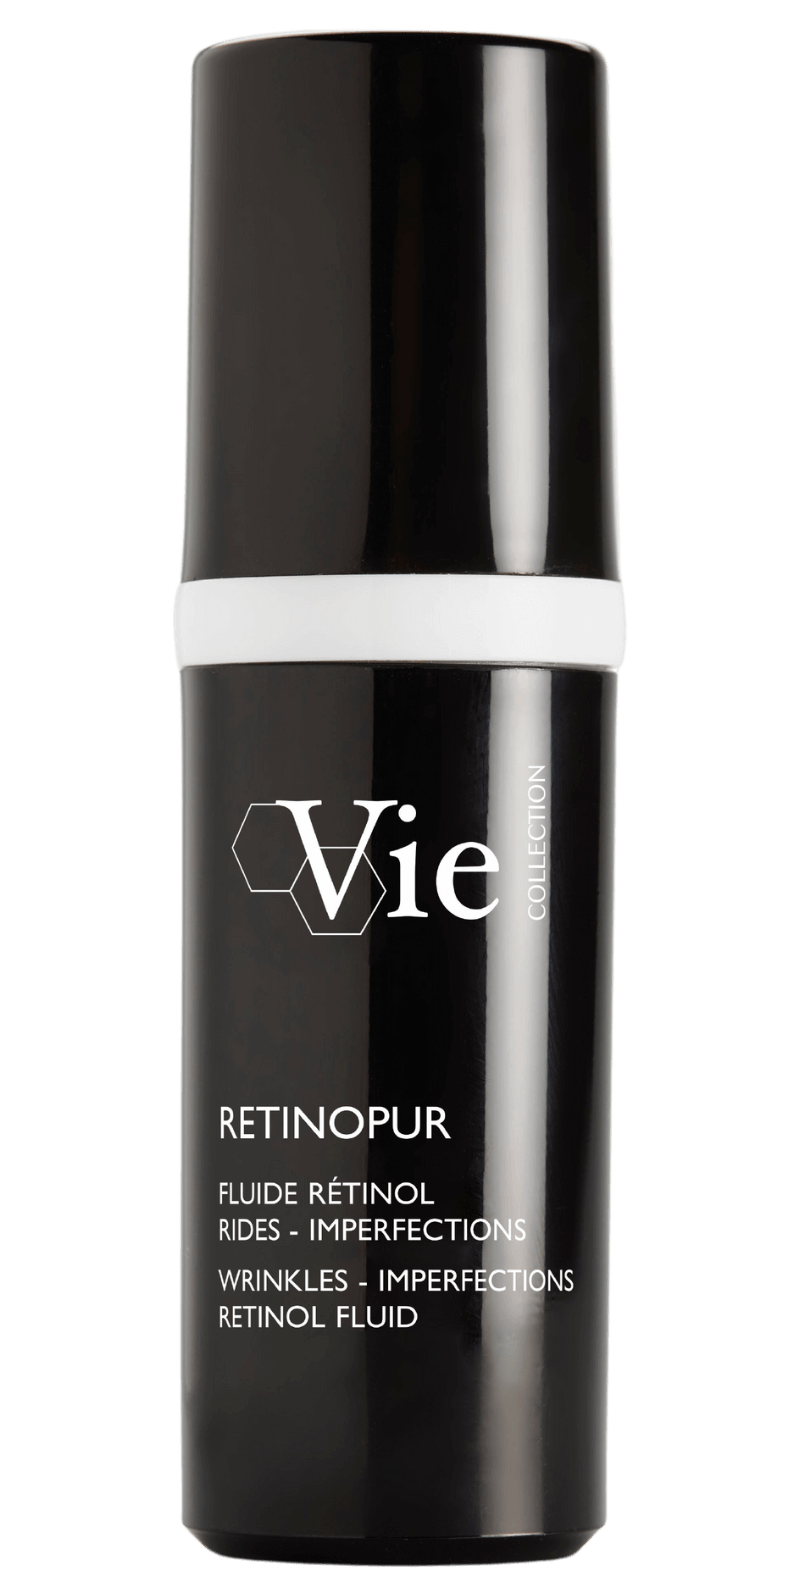 Vie Retinopur Fluid for Wrinkles and Imperfections